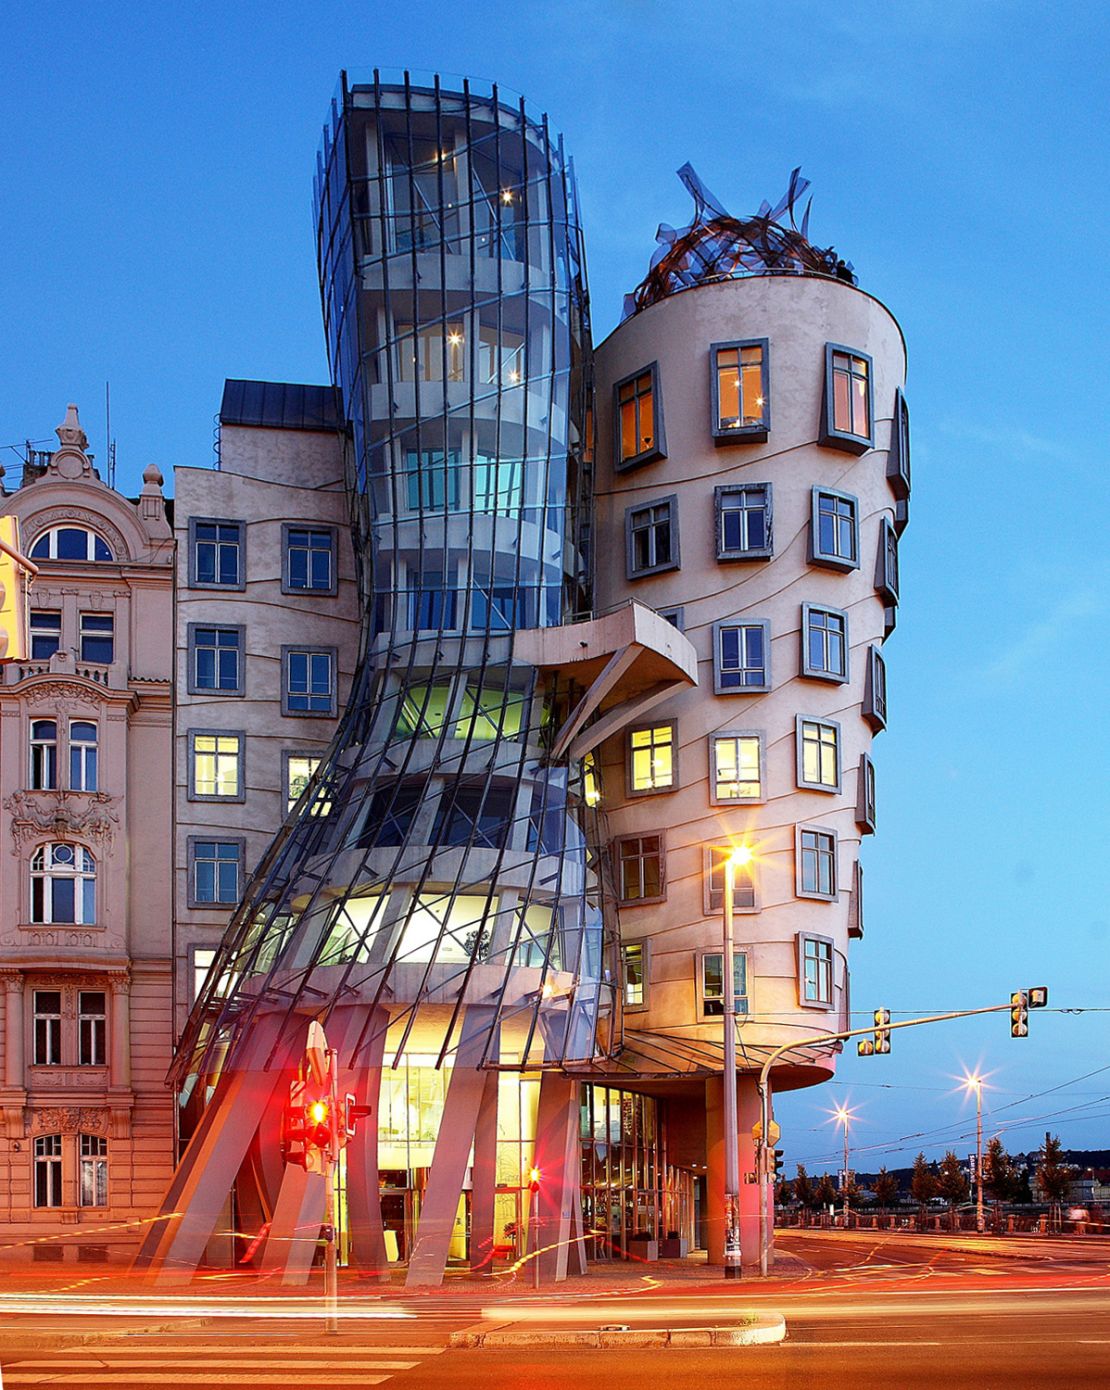 The fantastical Nationale-Nederlanden building in Prague -- or "Fred and Ginger" as it's colloquially known -- was designed by American architect Frank Gehry to have an intentional lean.